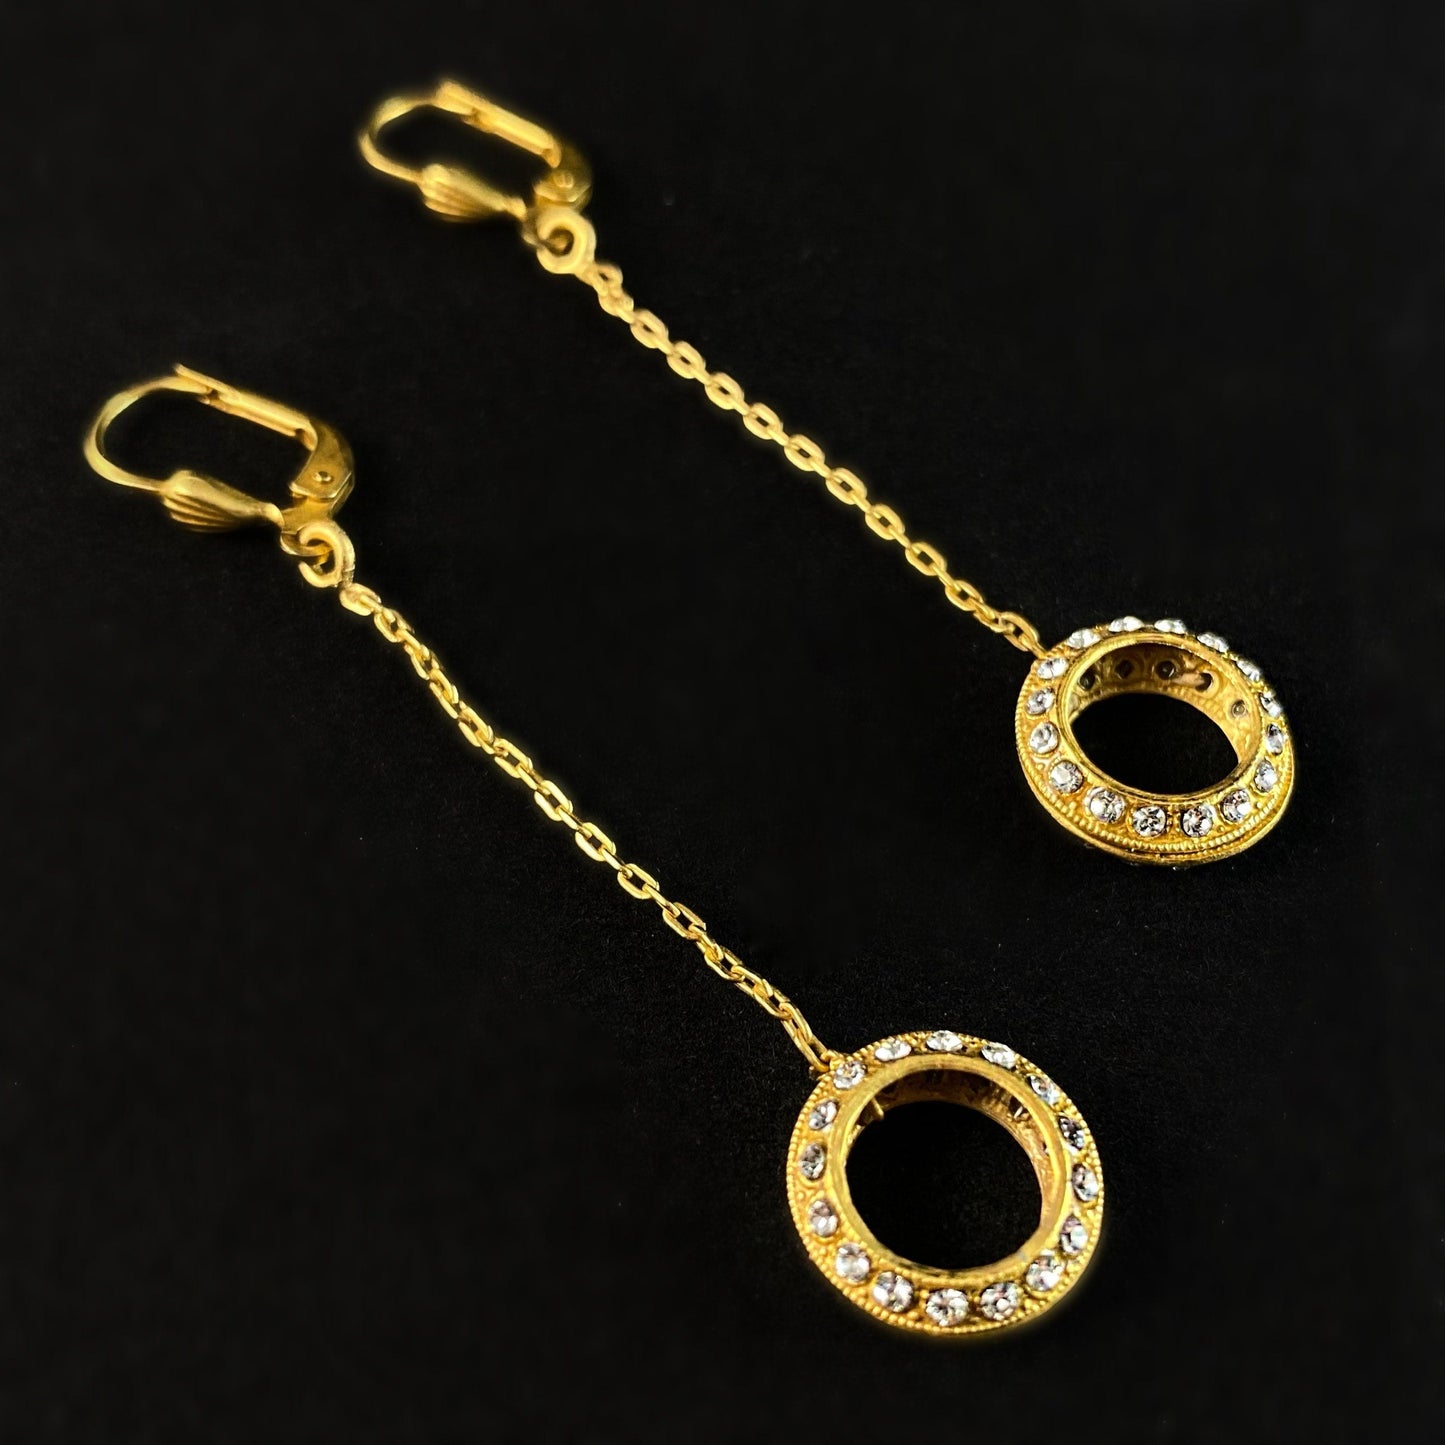 Round Gold Drop Earrings with Clear Swarovski Crystals - La Vie Parisienne by Catherine Popesco